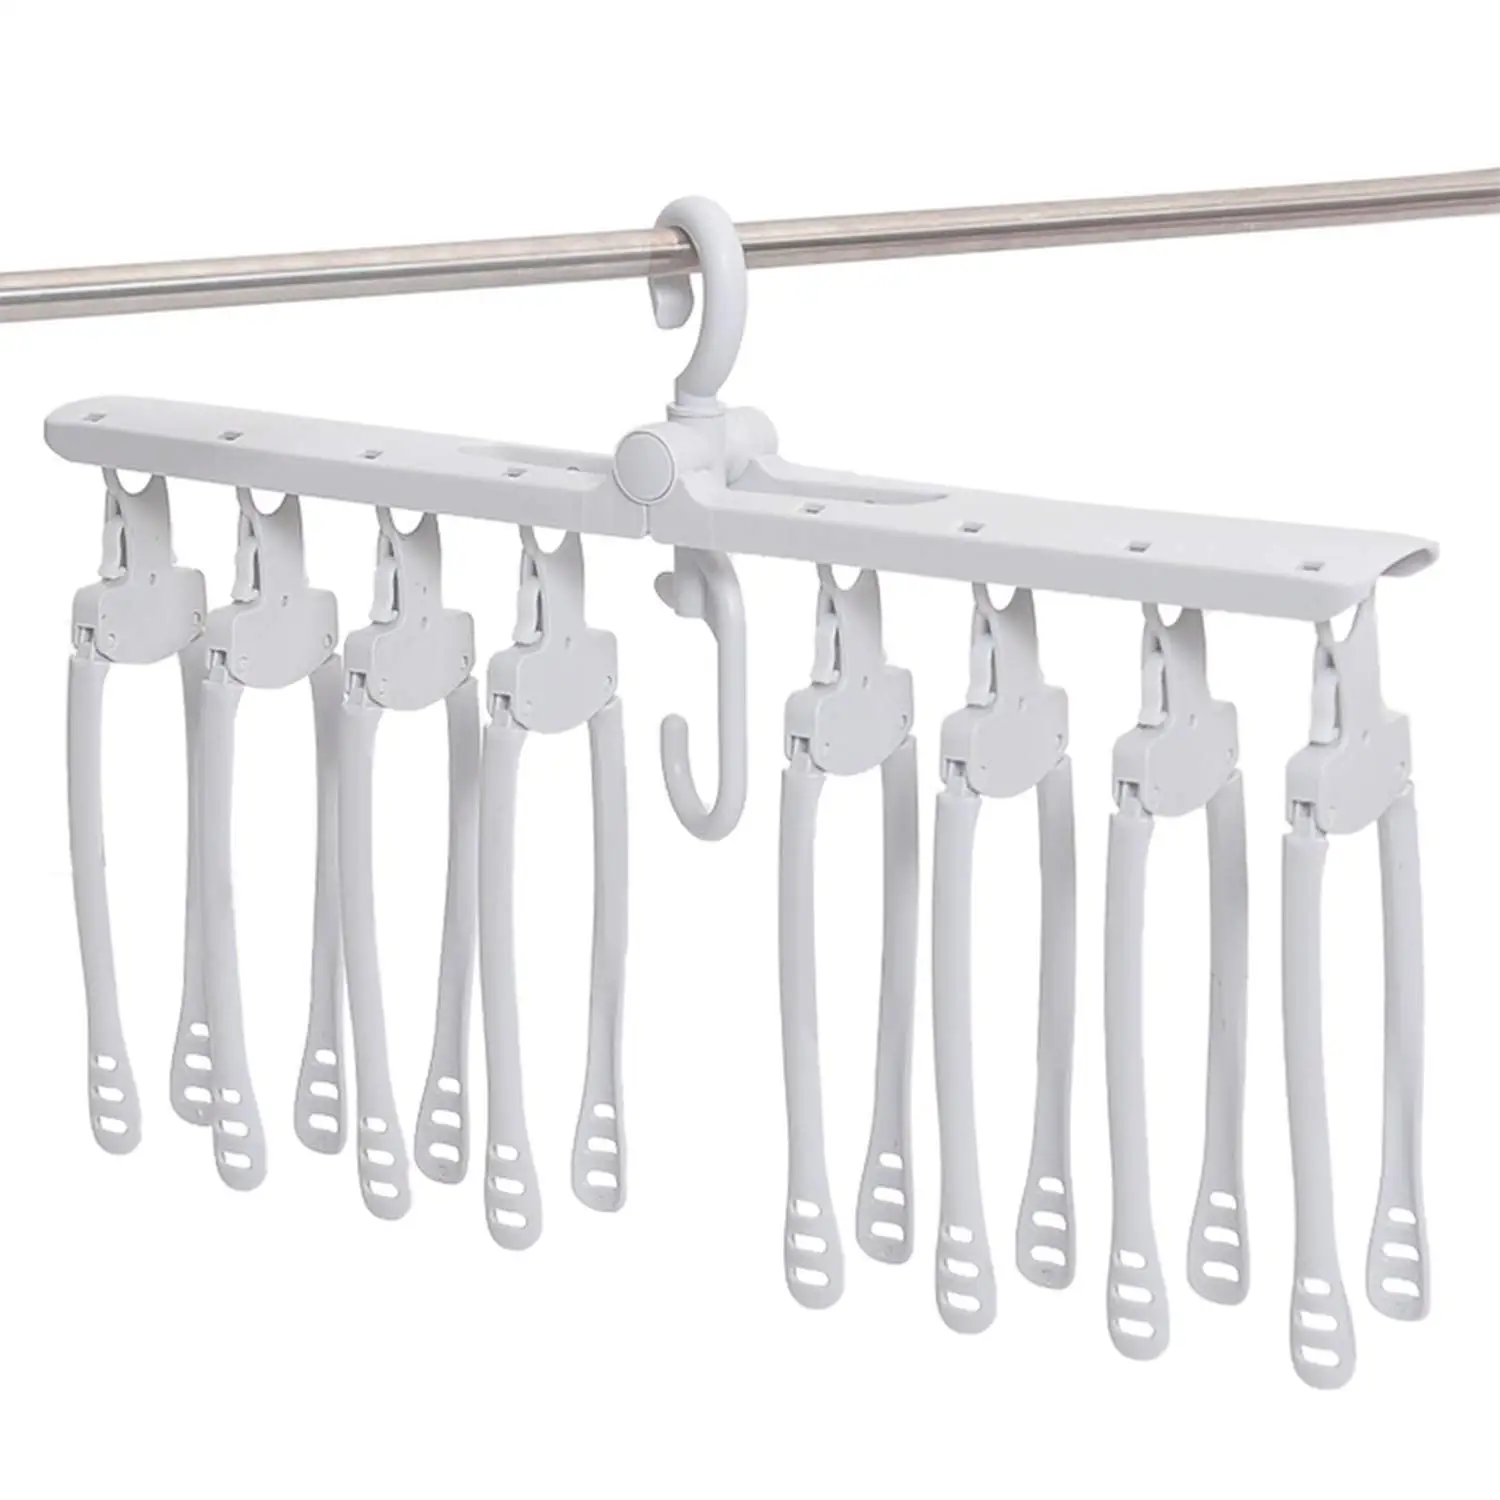 NAHAO Adjustable Clothes Hangers Expandable Durable Stainless Steel DIY Telescopic Hanger Drying Storage Wardrobe Hanger for Kids Children and Adults Pack of 8 